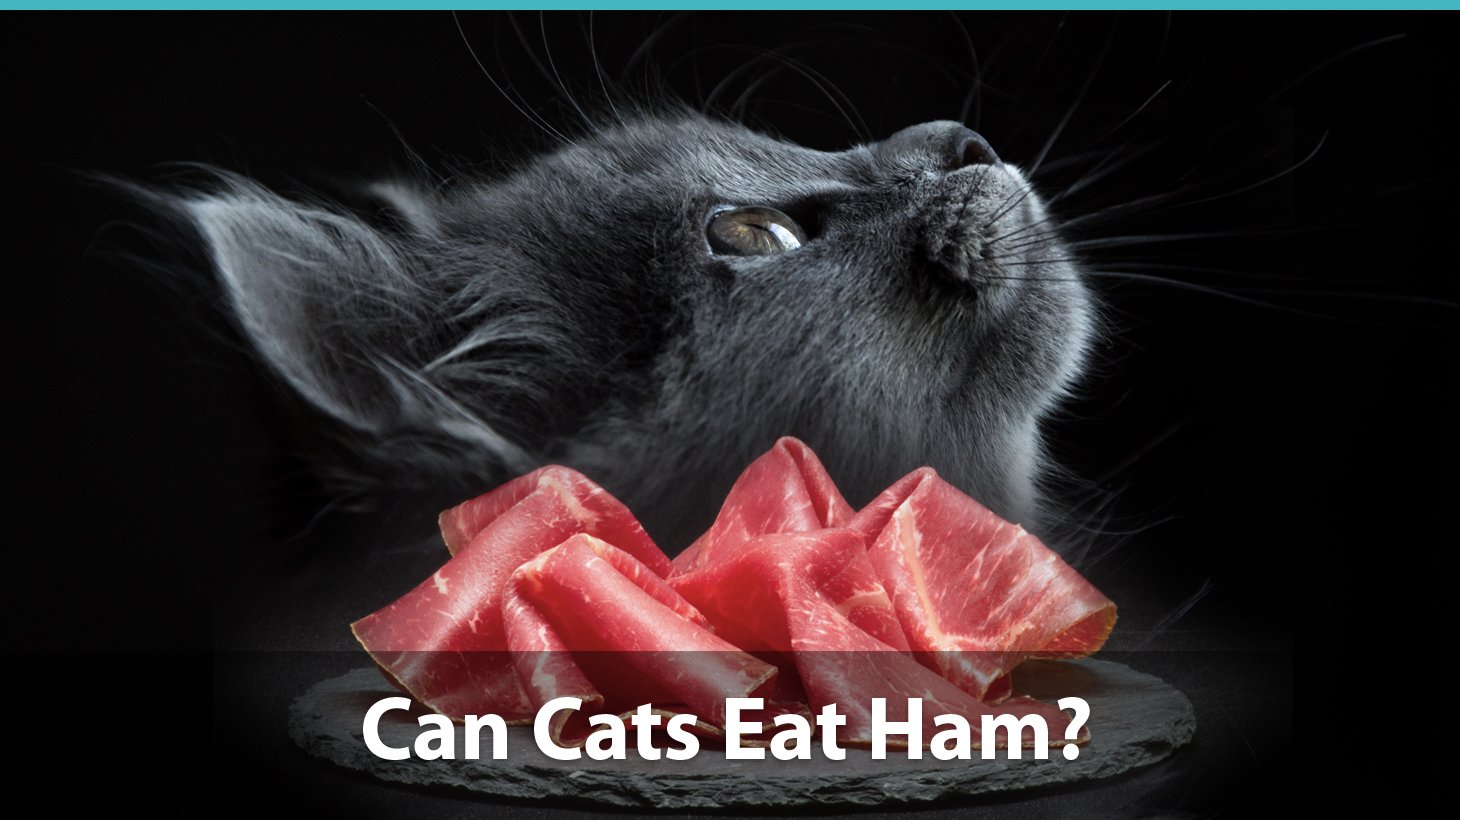 35 Top Images Can Cats Eat Honey Ham : Can Cats Eat Ham Or Is It Bad For Them